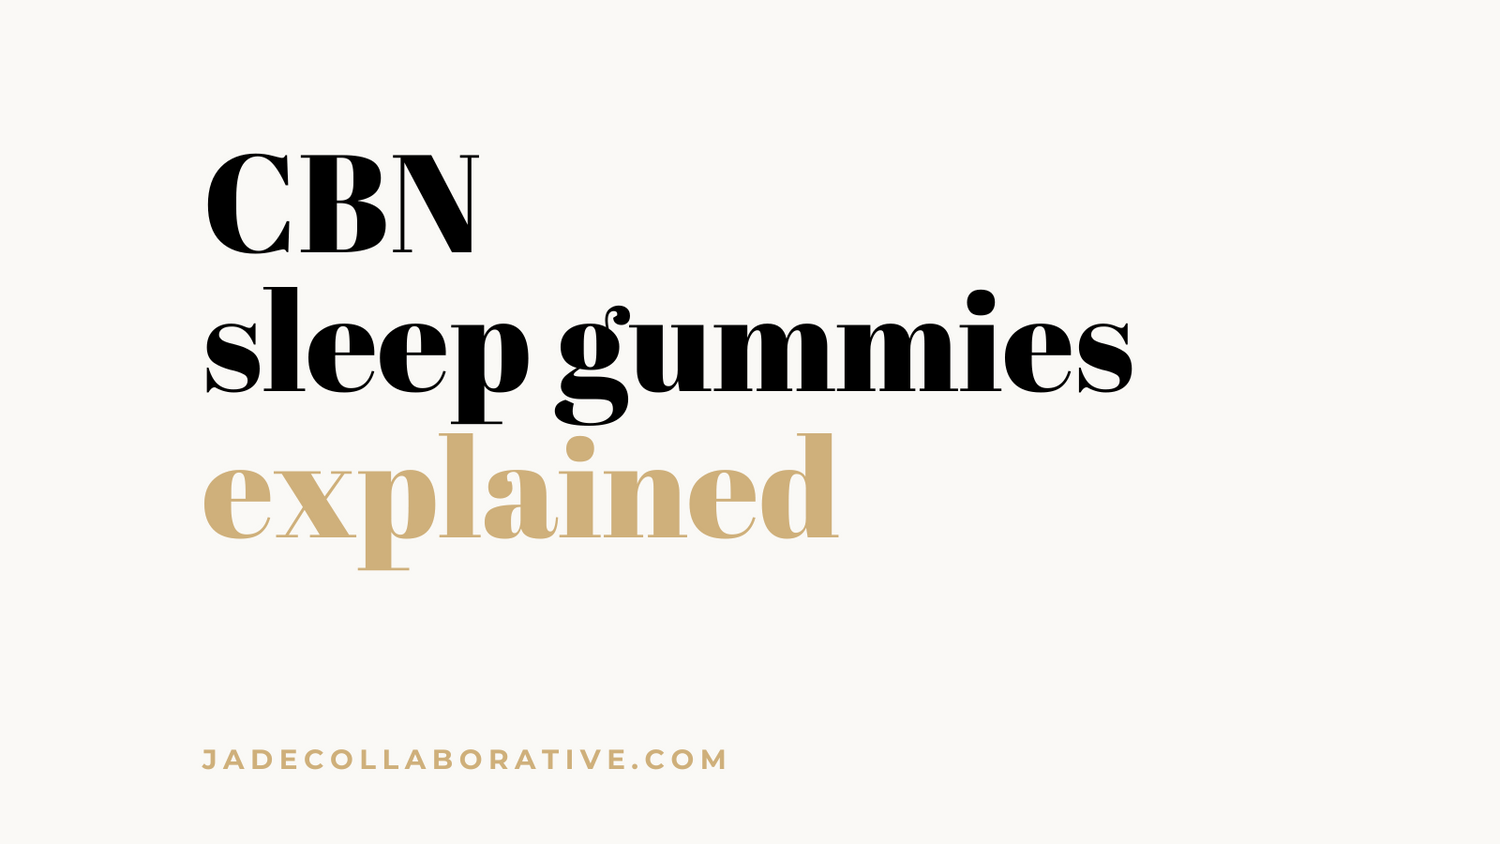 cbn sleep gummies explained: benefits & what are they? by Jade Collaborative